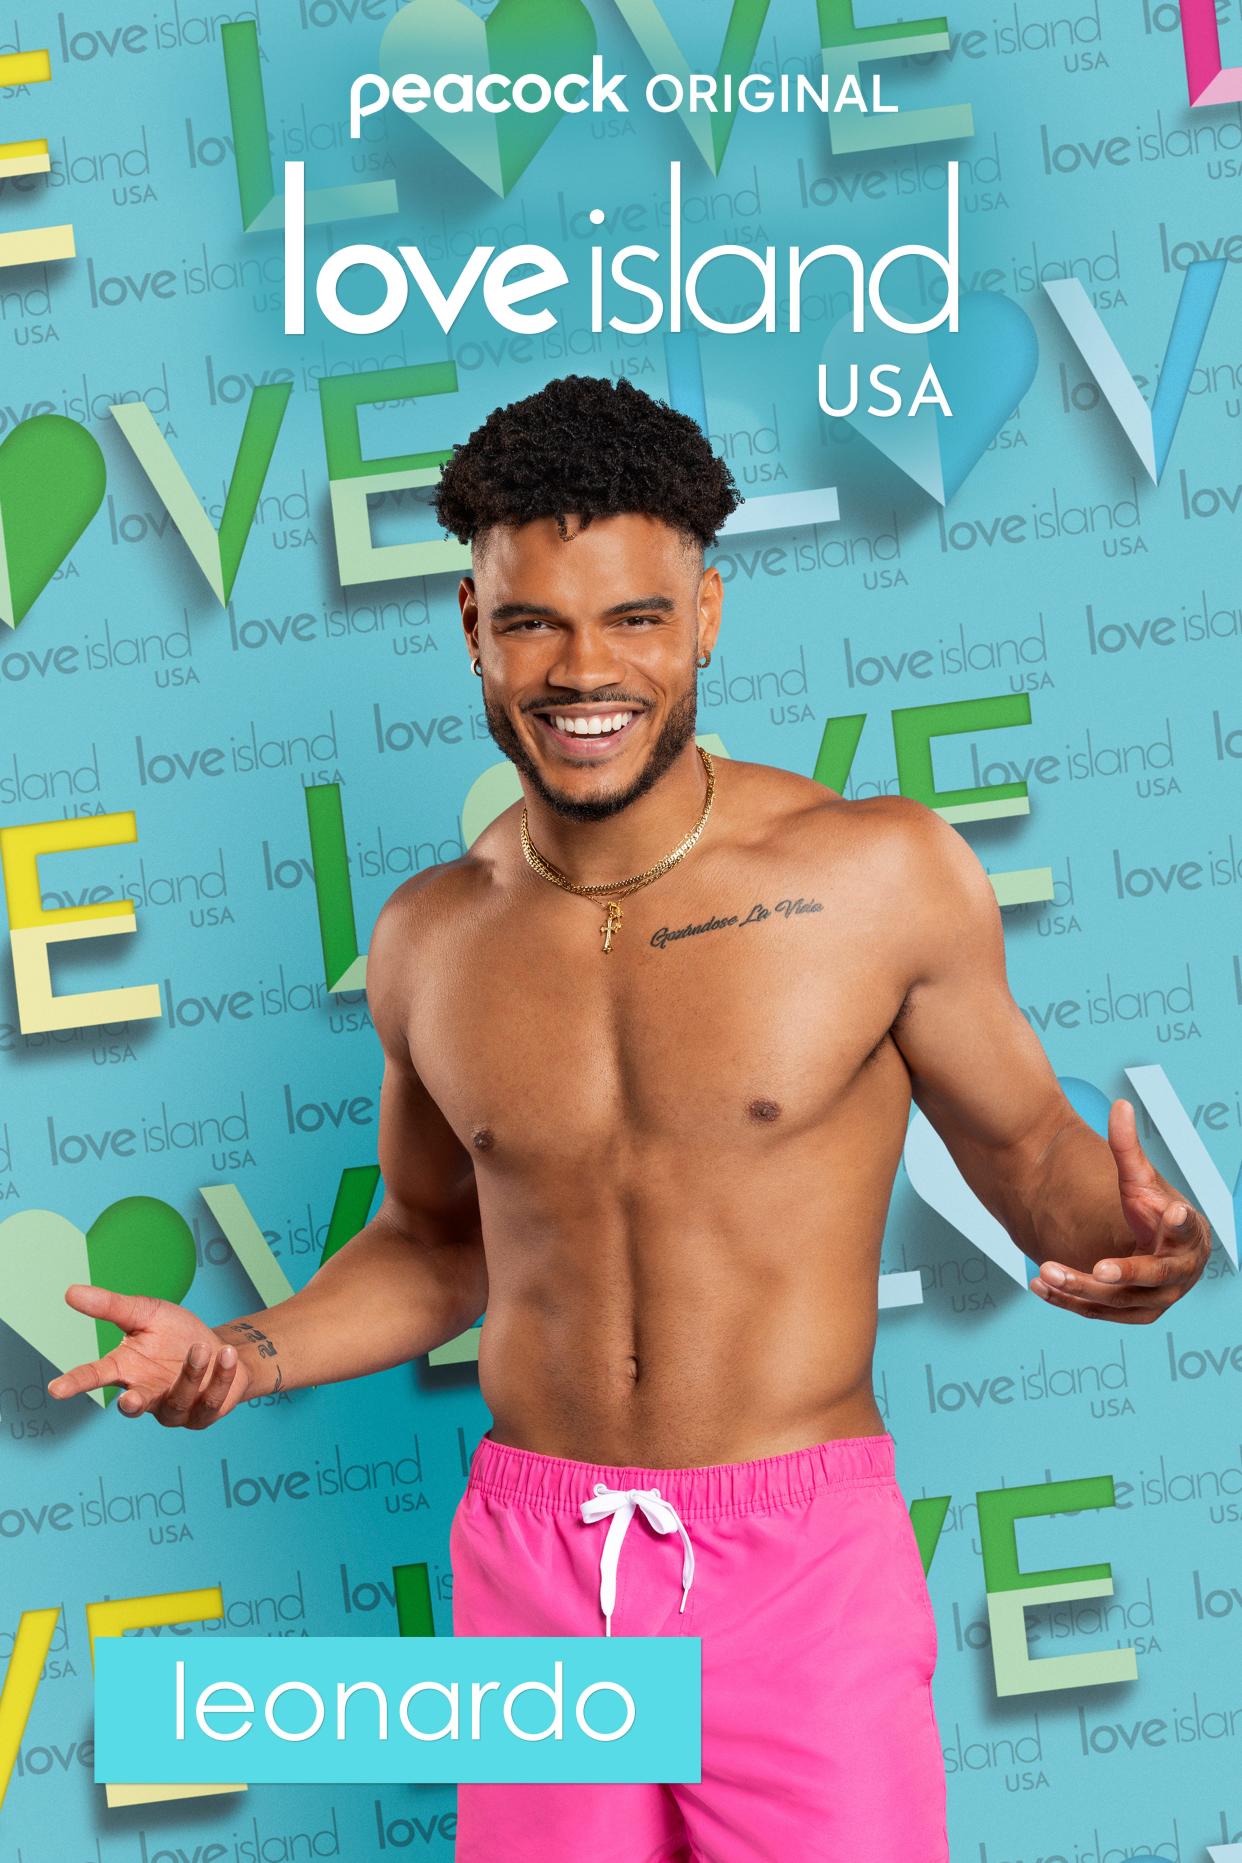 "Love Island USA" season 5 contestant Leonardo Dionacio is a 21-year-old salesman from West Hartford, Connecticut, who played Division I college baseball for the University of Dayton.